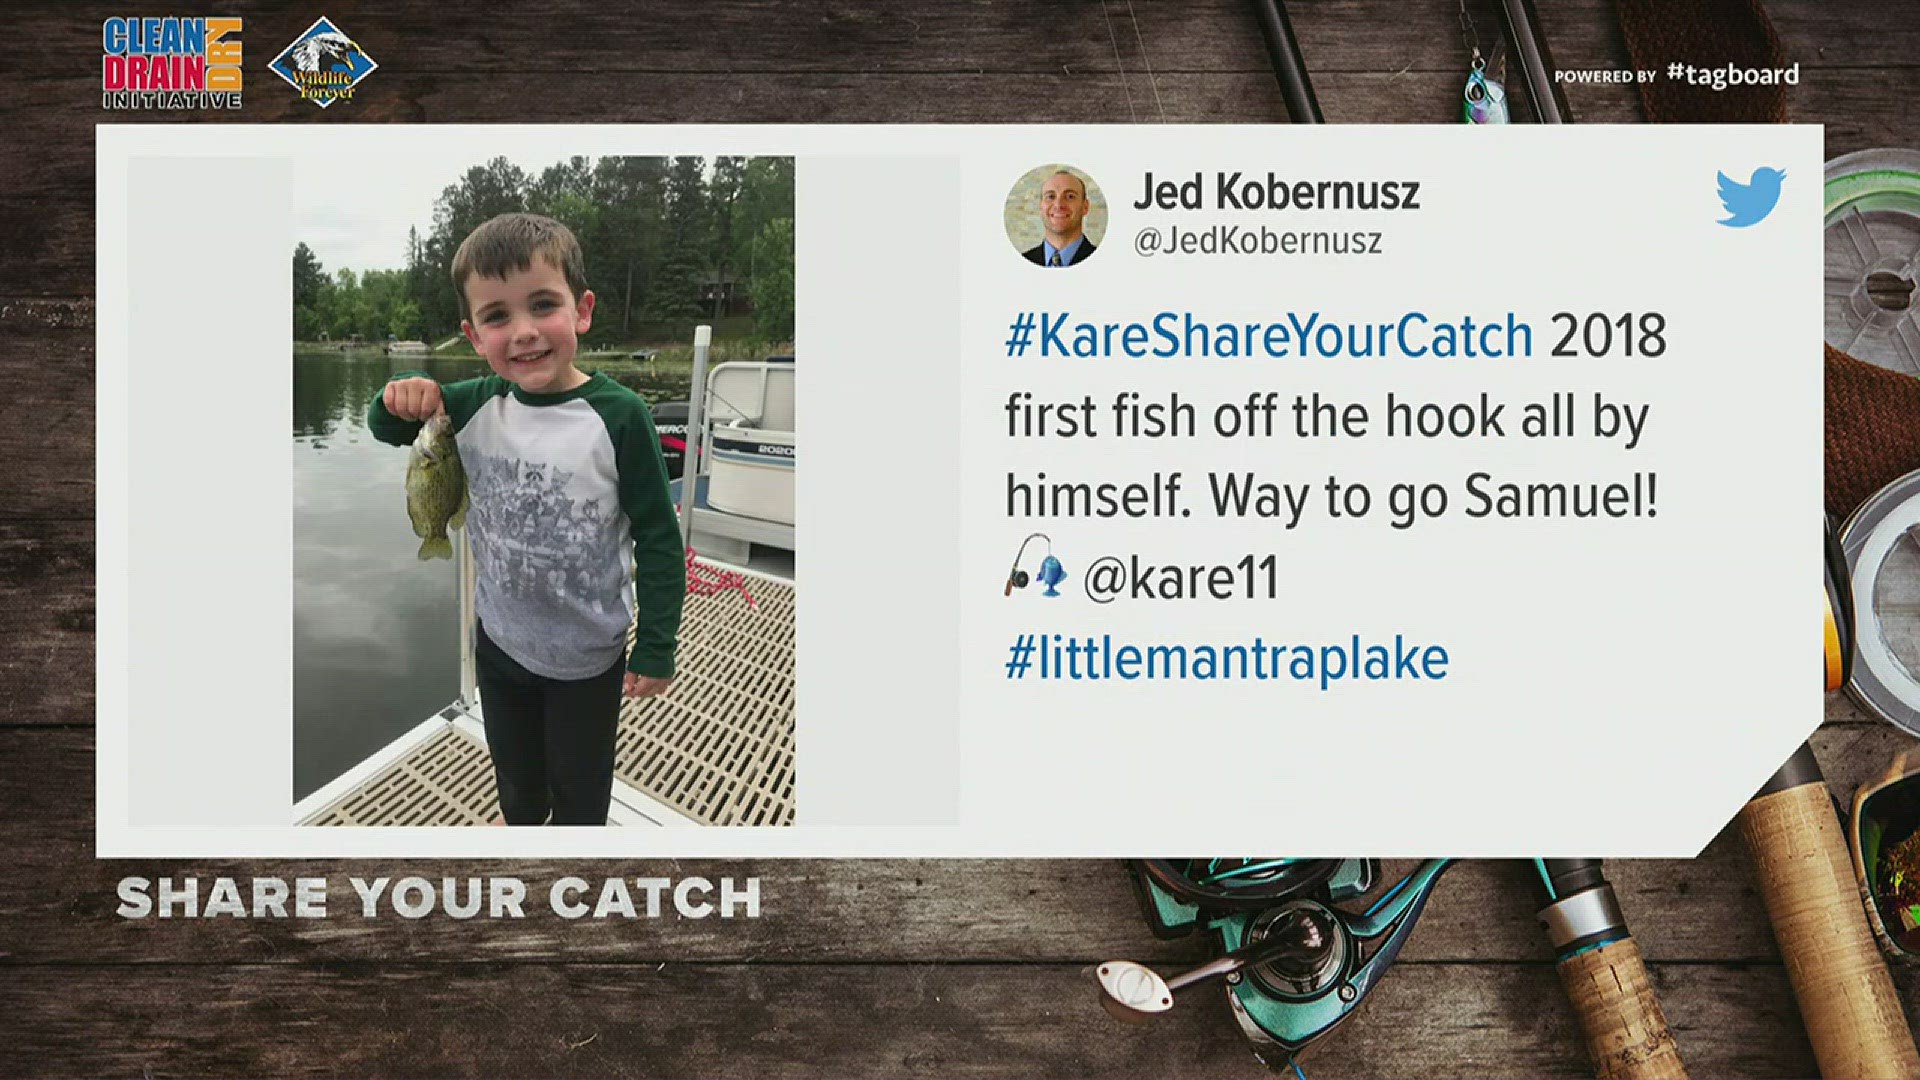 KARE 11 viewers can share their fish photos no matter how big the catch. Use the #KARE ShareYourCatch or add to KARE 11's Facebook page.